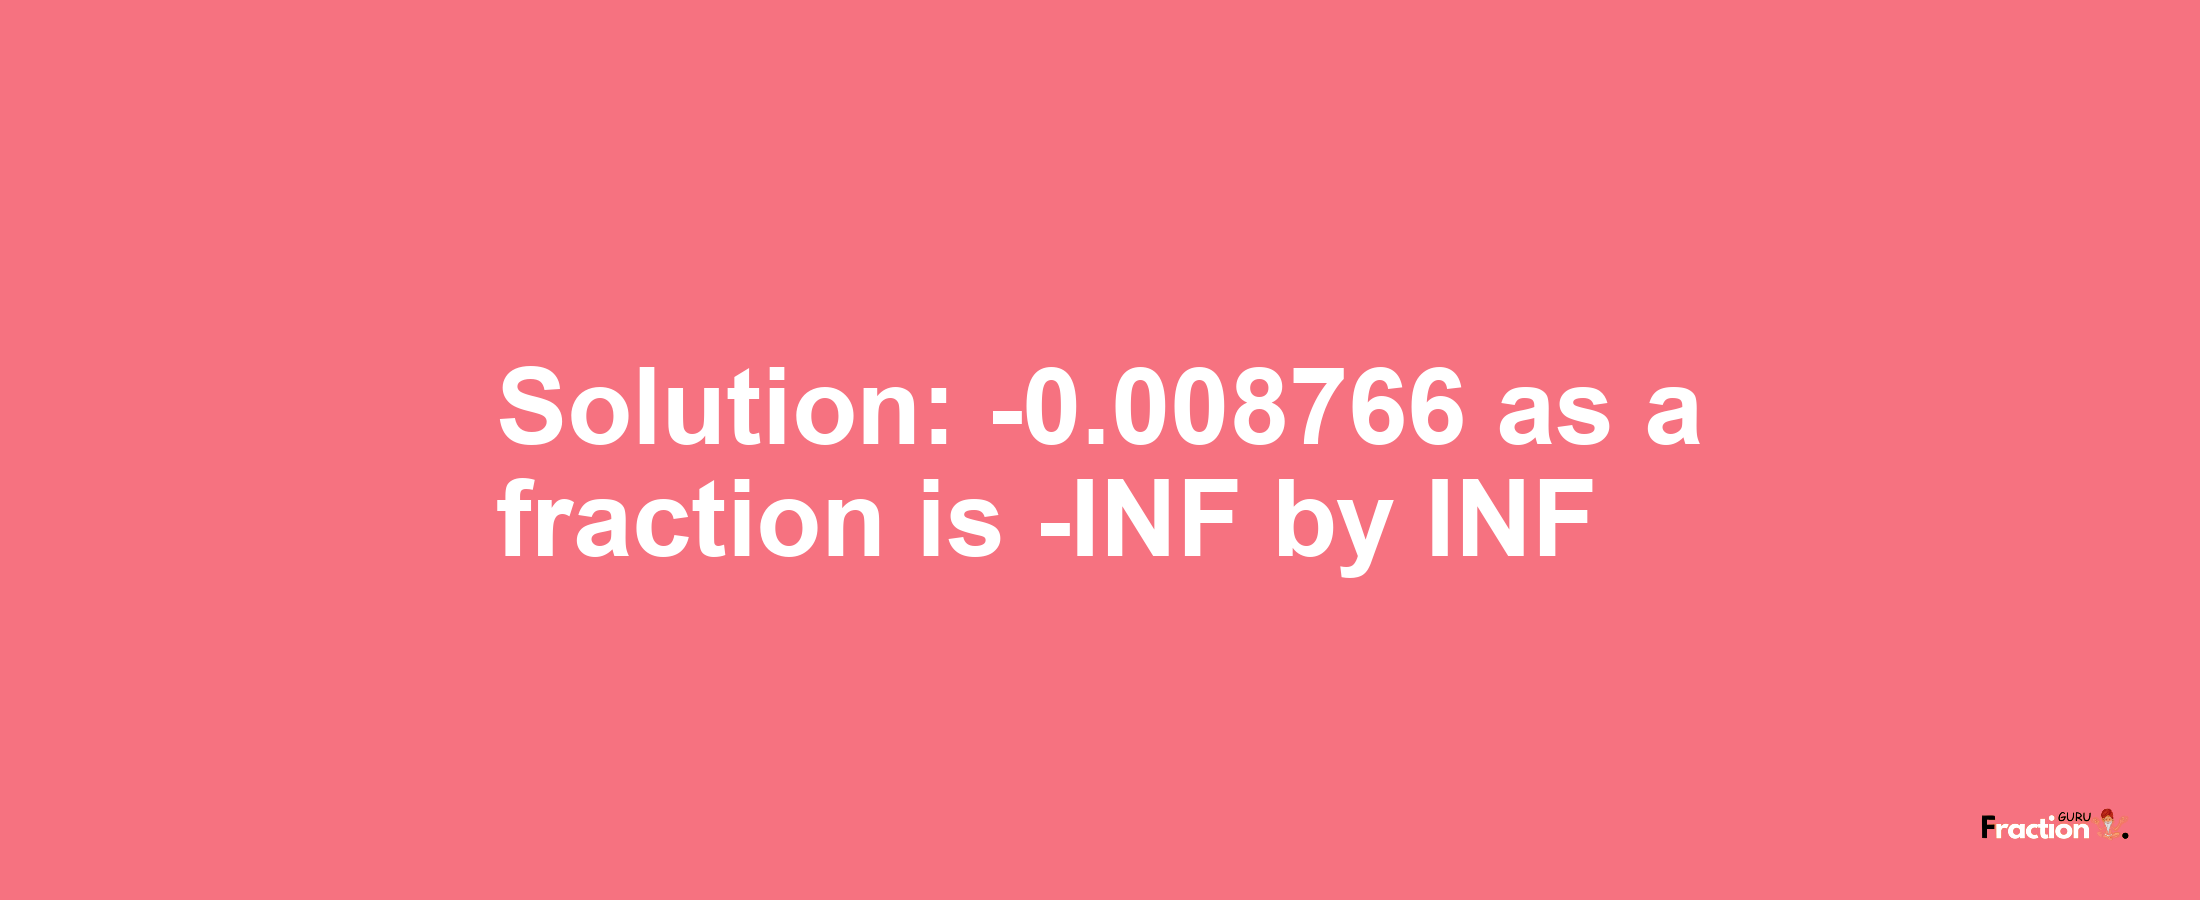 Solution:-0.008766 as a fraction is -INF/INF